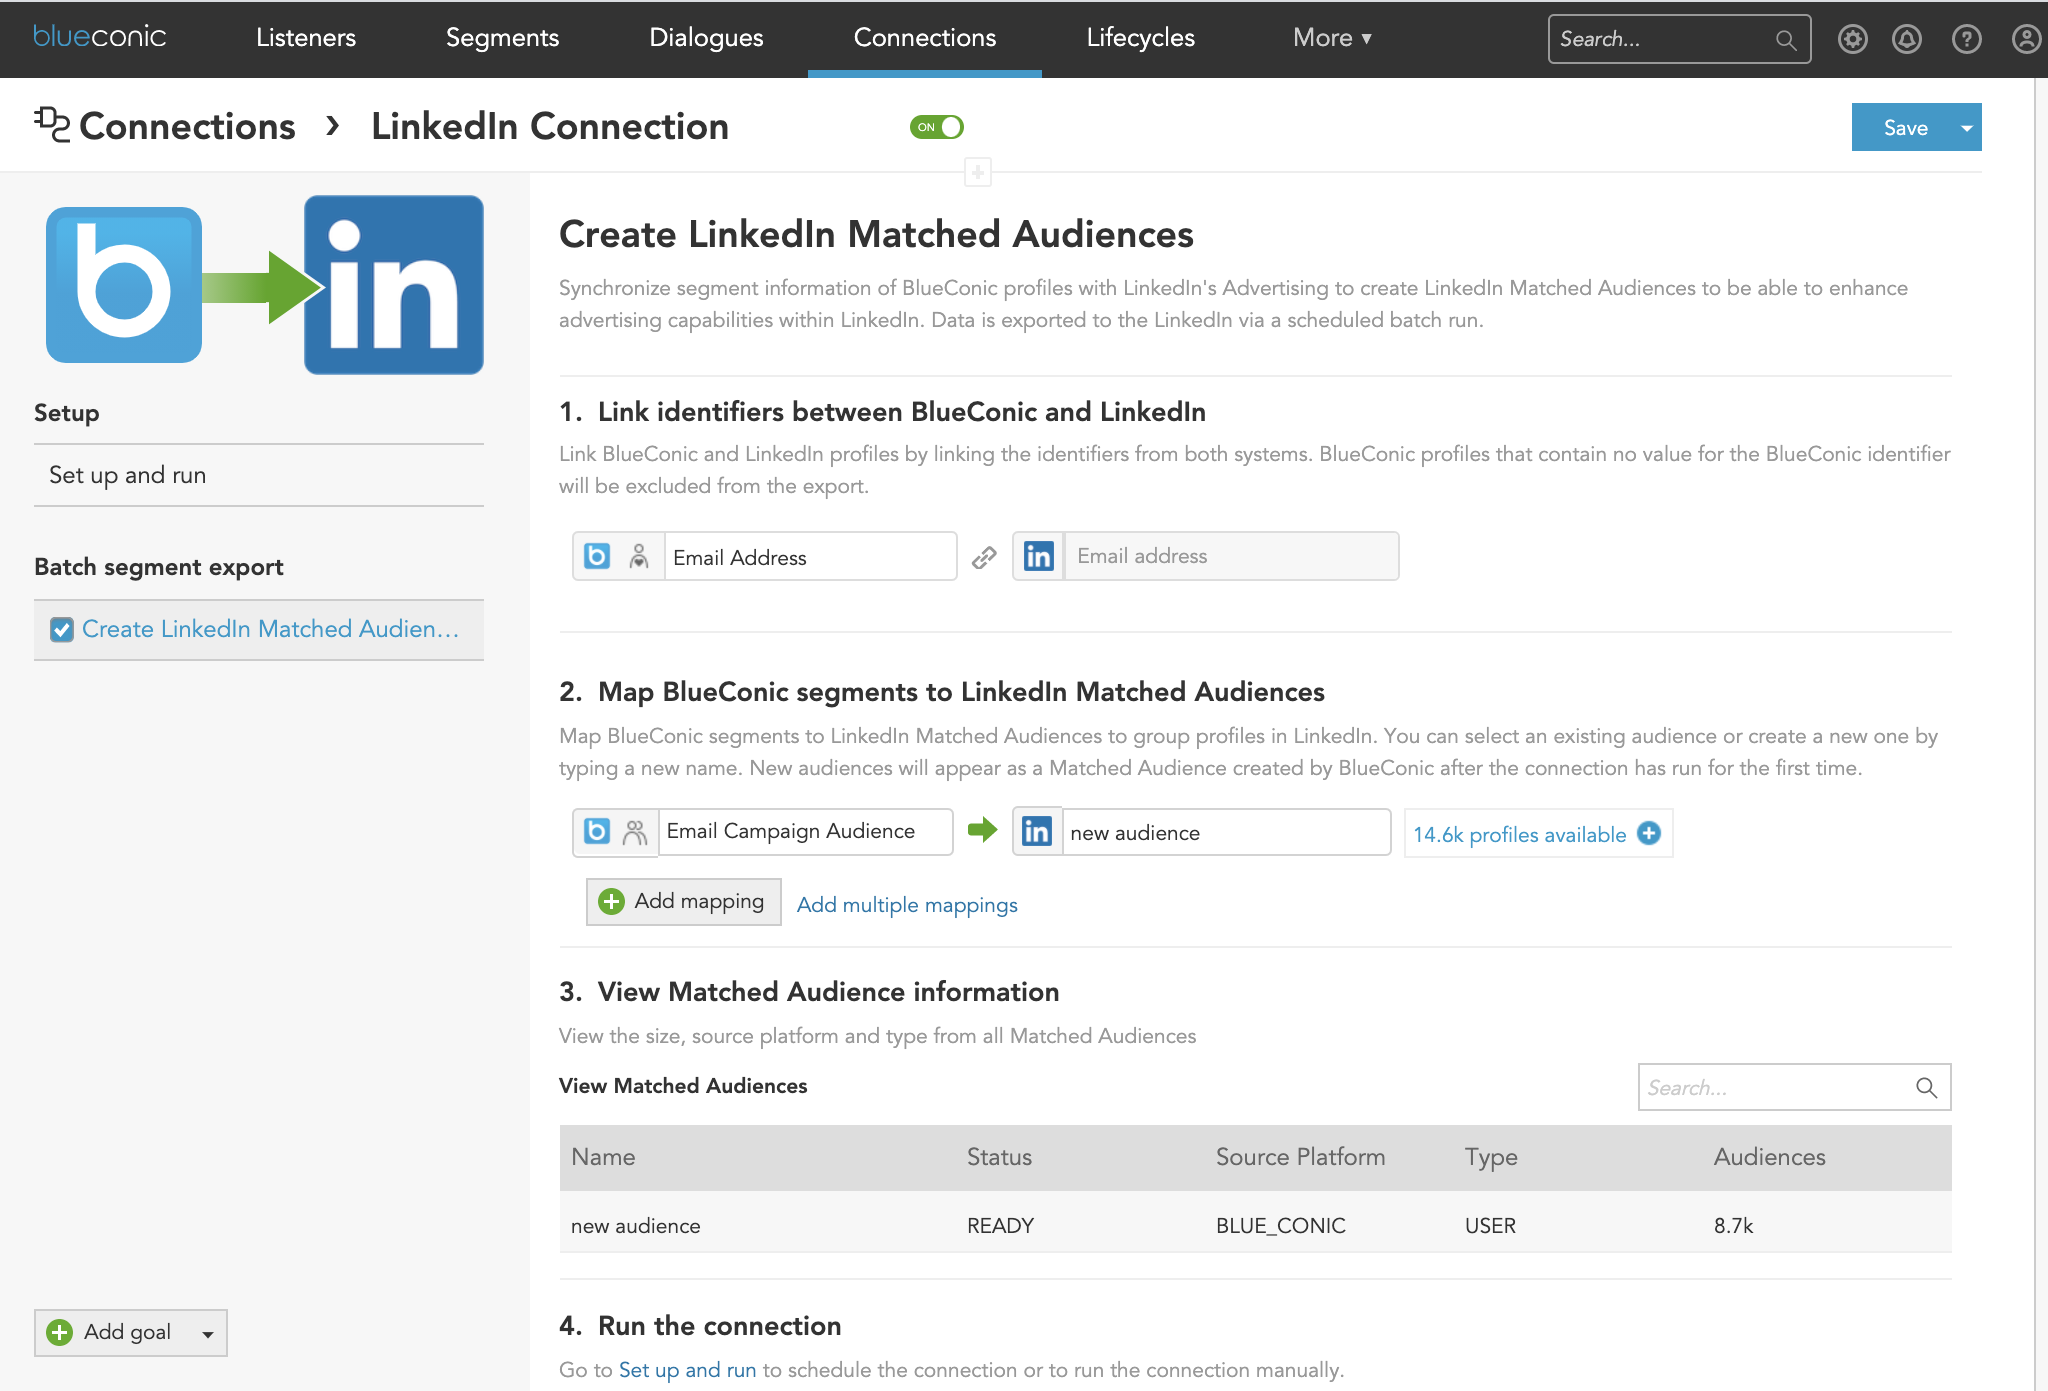 Does the BlueConic CDP connect customer profile data with LinkedIn to create matched audiences?